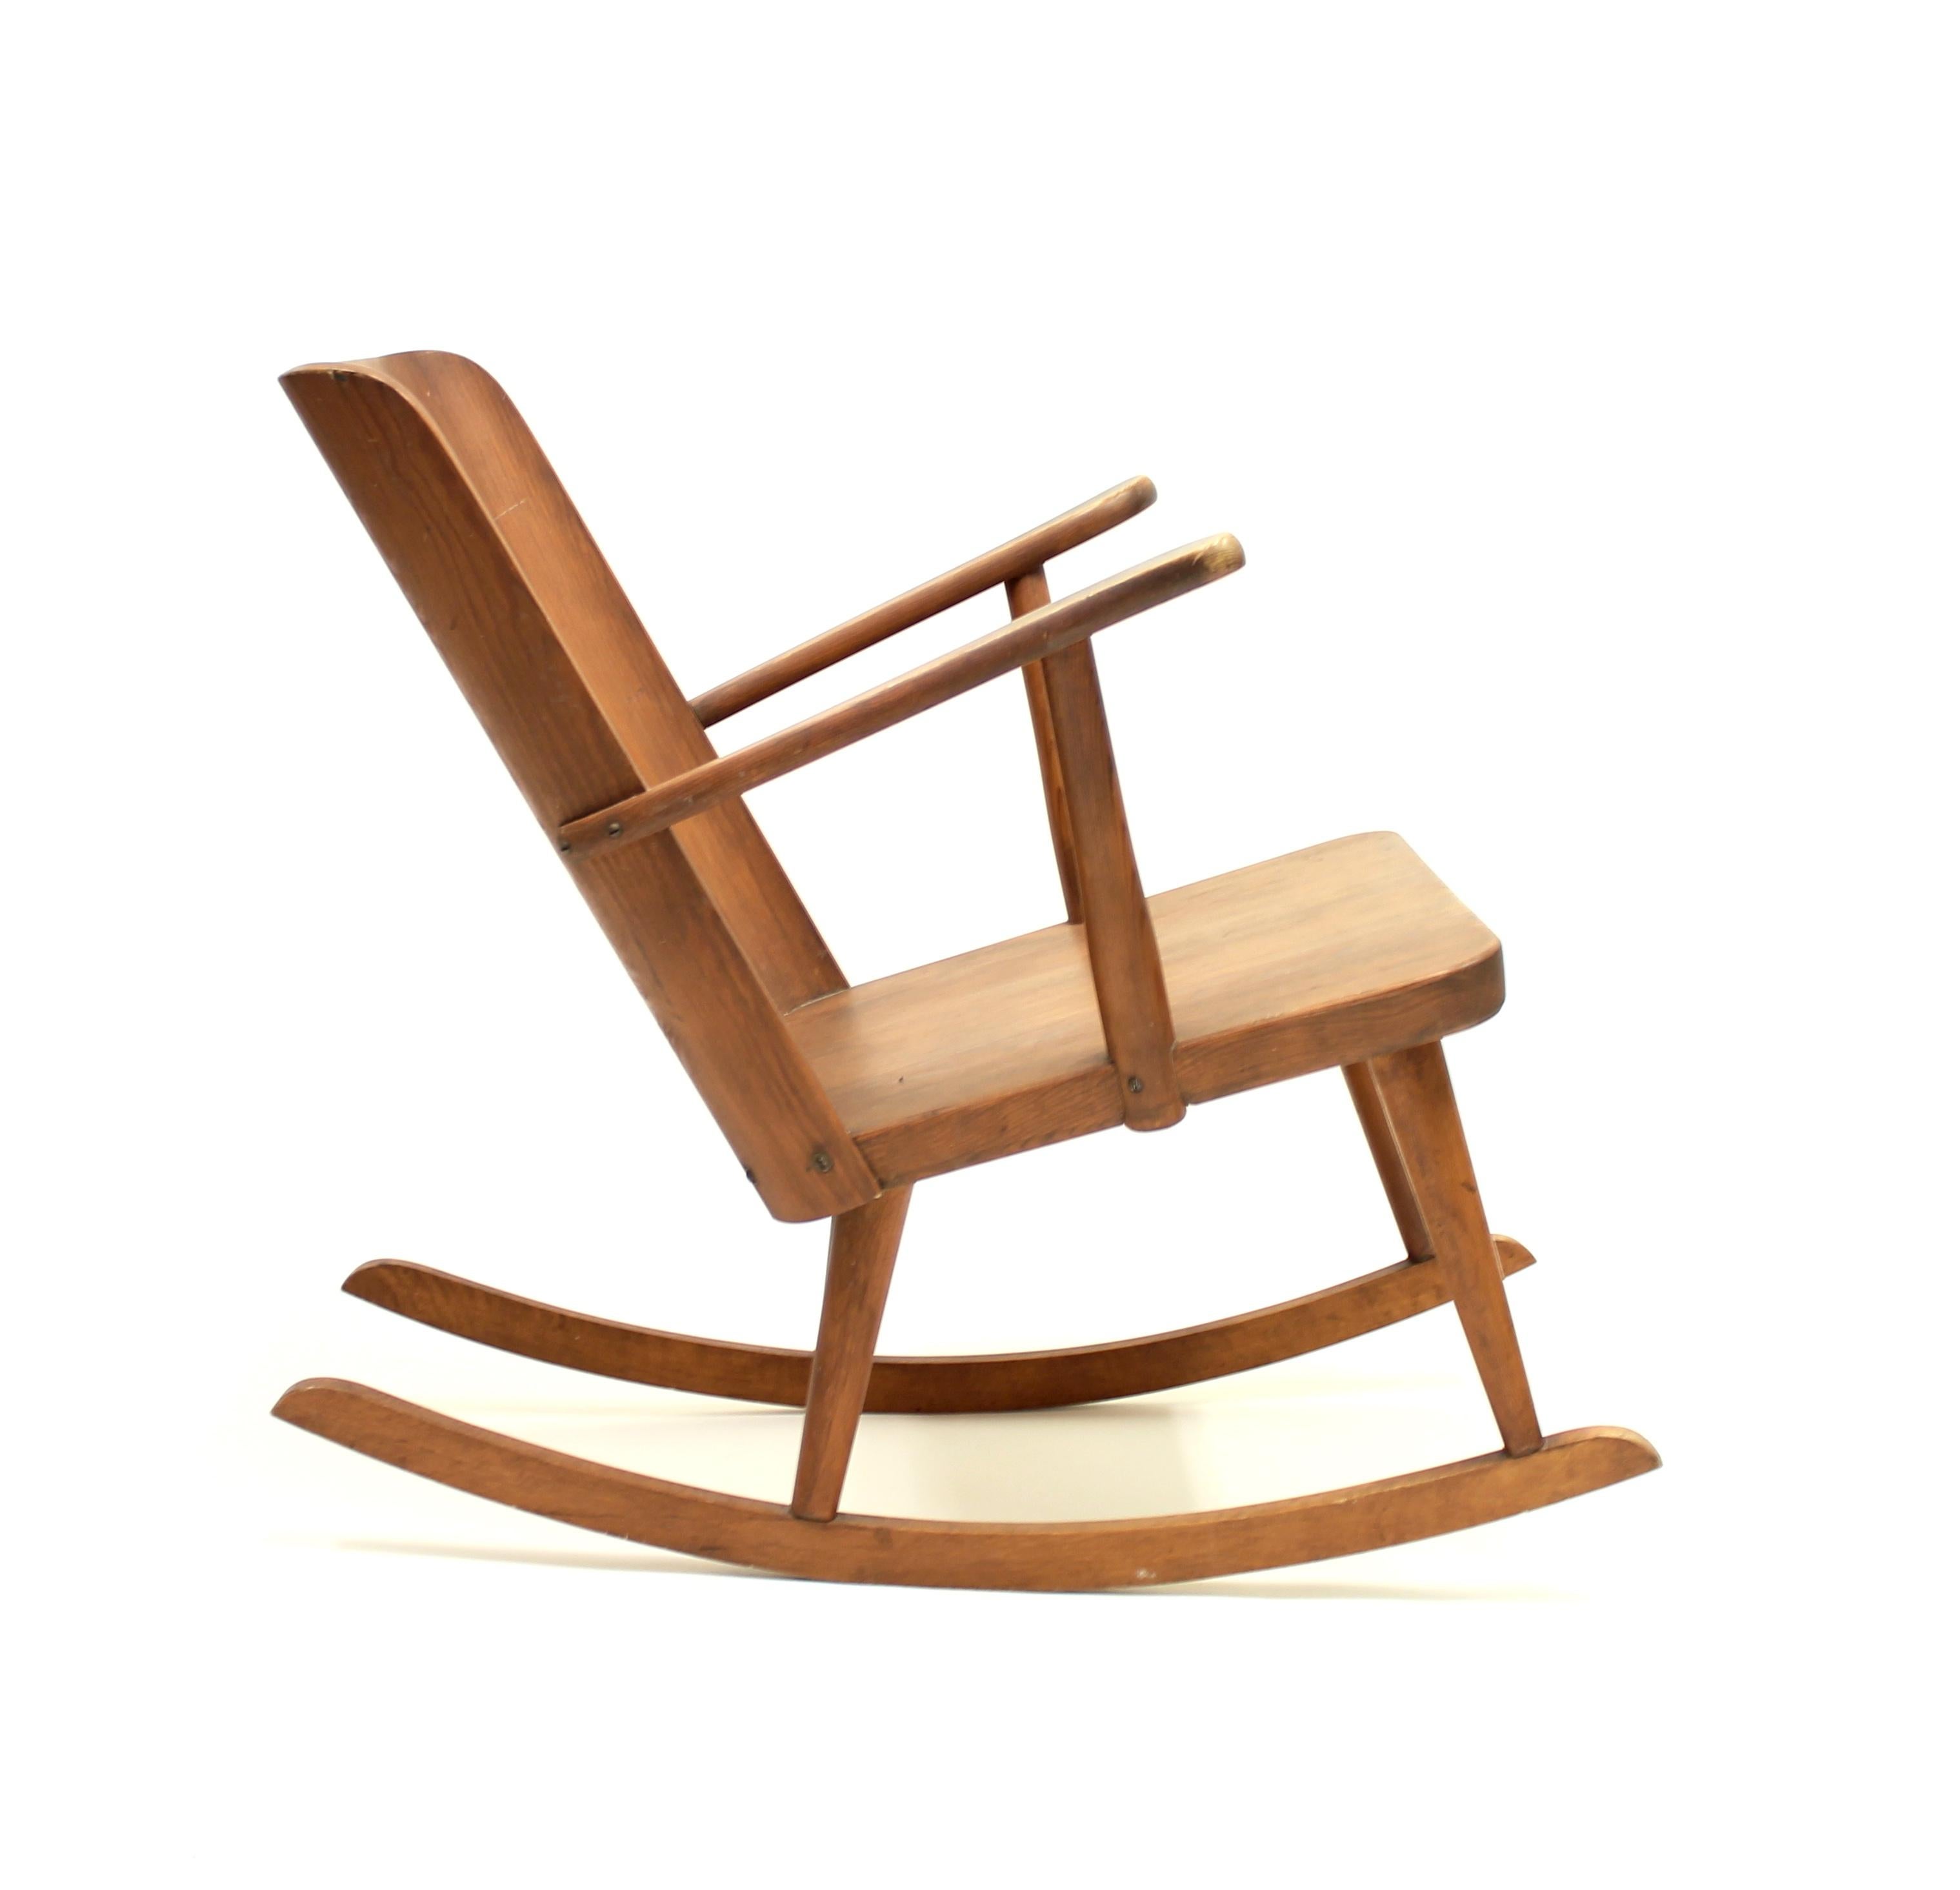 Mid-20th Century Pine Rocking Chair by Göran Malmvall in the Svensk Fur Range for Karl Andersson For Sale